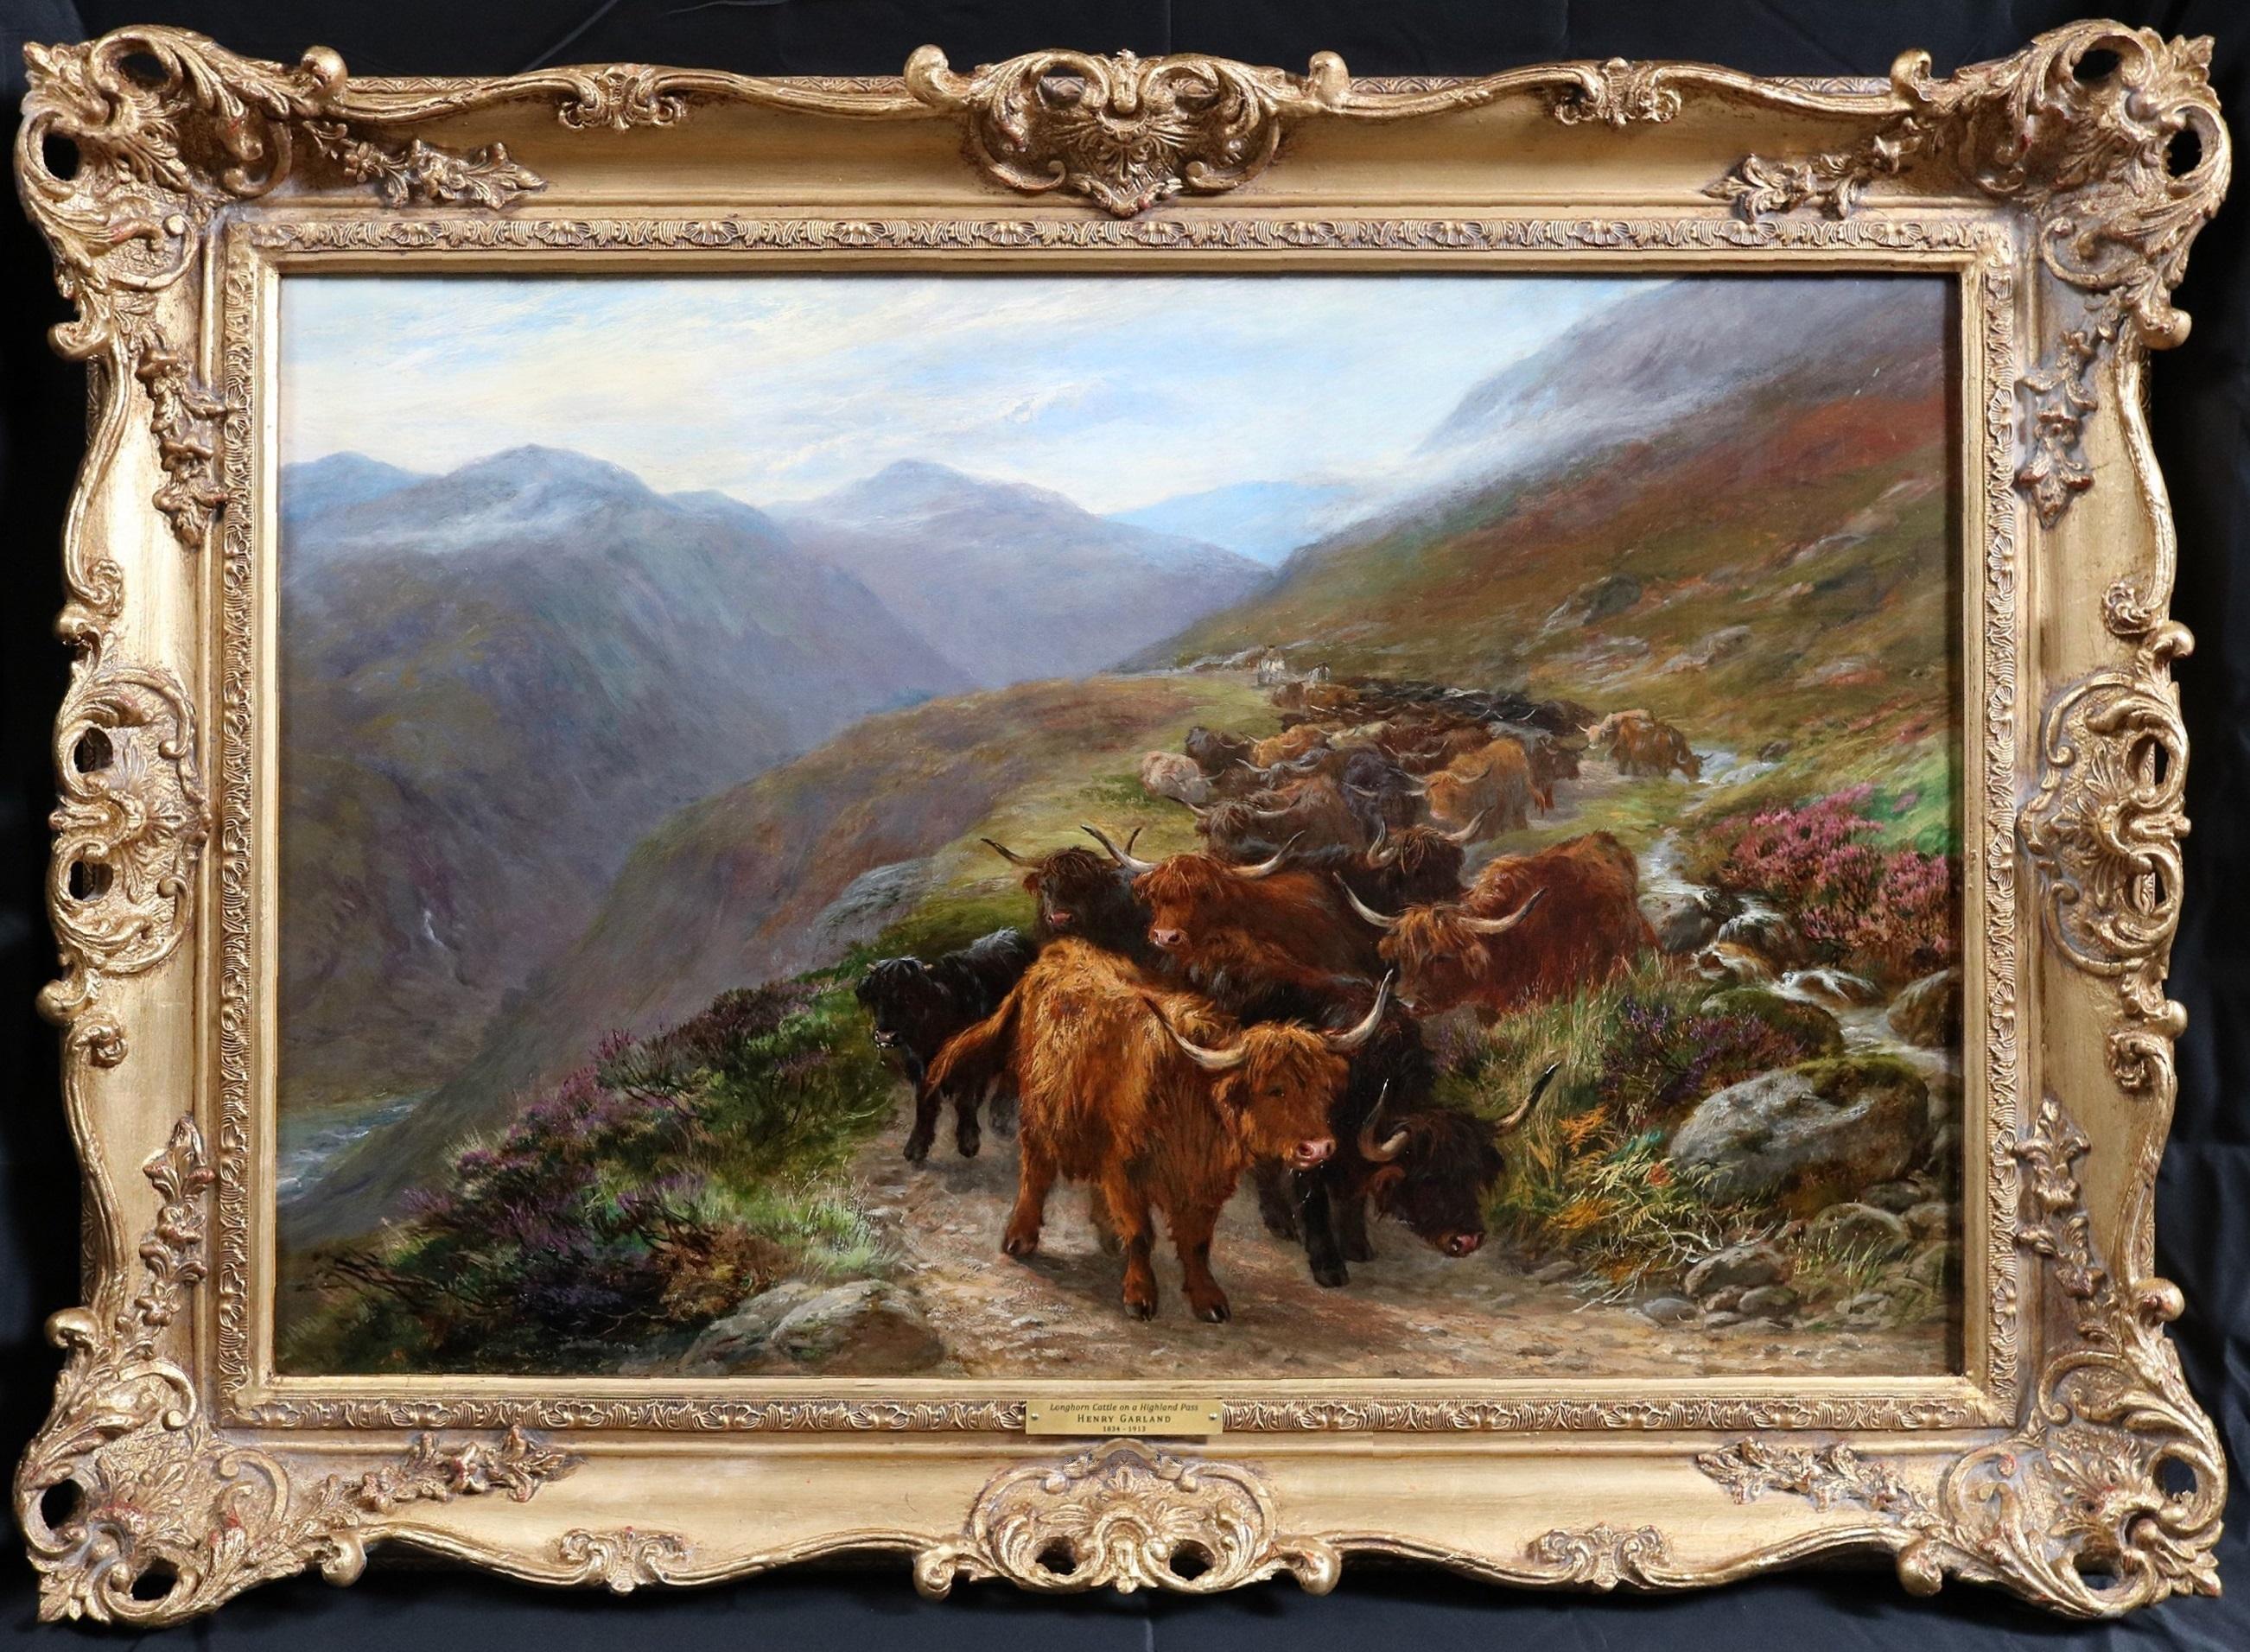 Longhorn Cattle on Highland Pass - 19th Century Scottish Landscape Oil Painting  - Brown Animal Painting by Henry Garland